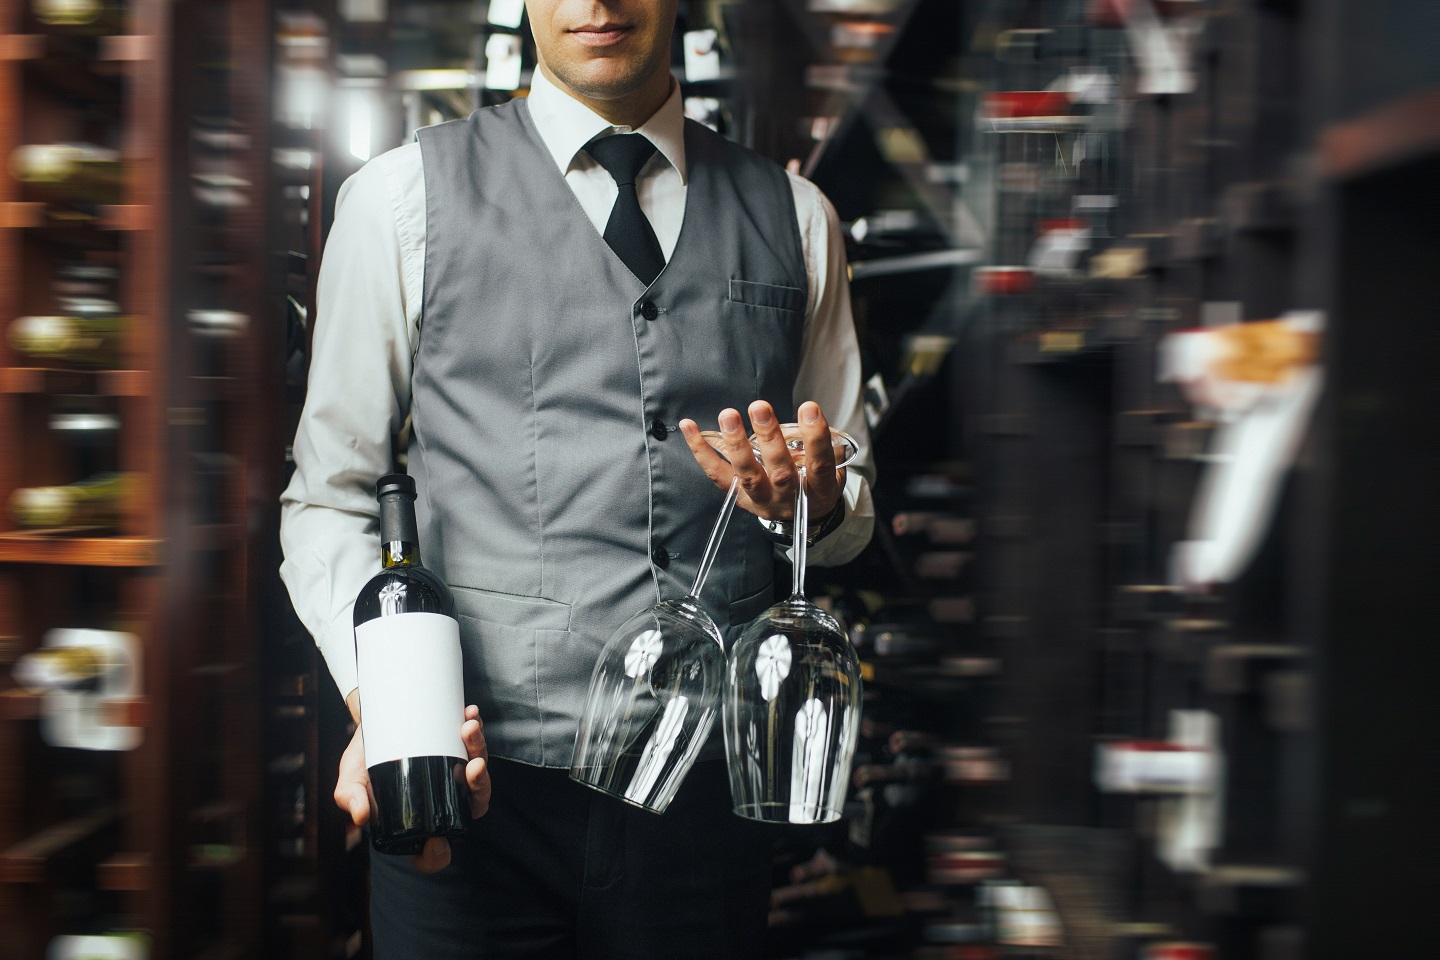 Misconceptions about sommeliers